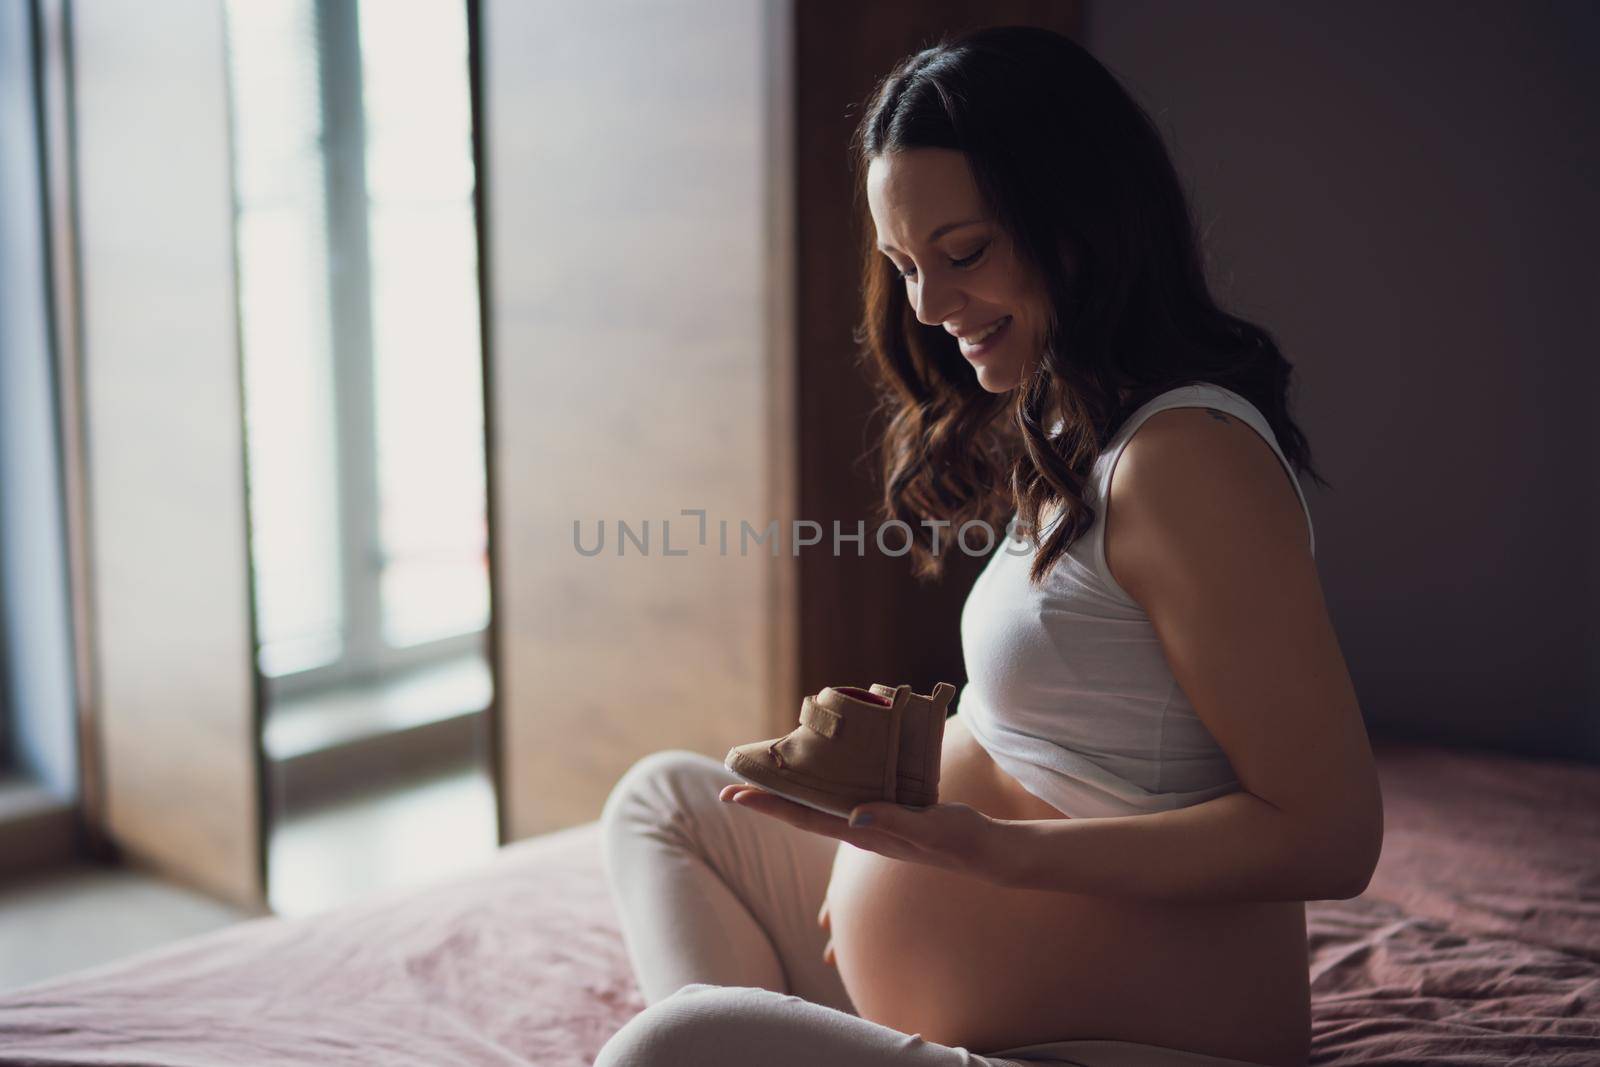 Pregnant woman relaxing at home. She is sitting on bed and holding baby shoes.